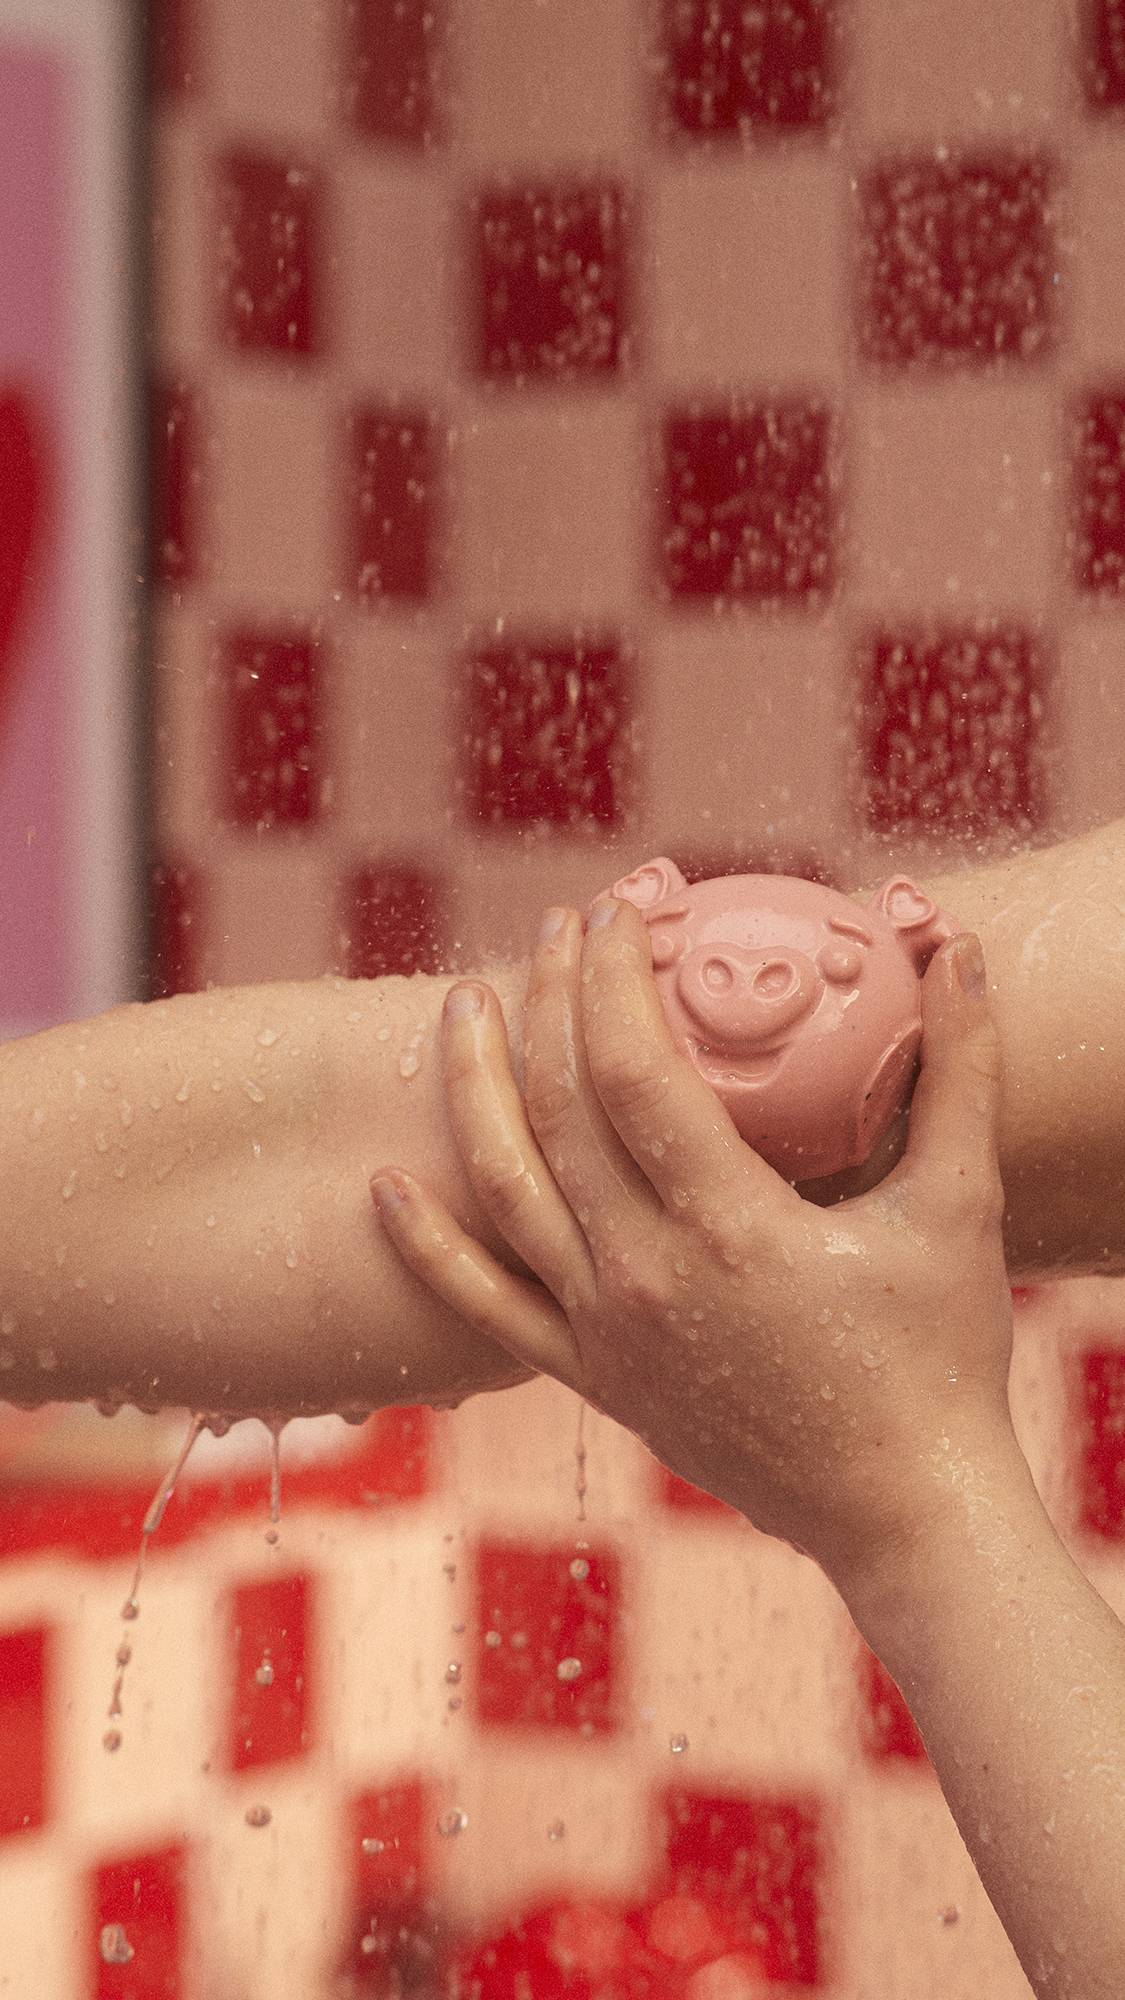 The image shows a close-up of the model lathering up their forearm with the My Li'l Chia Piglet soap under a running shower. 